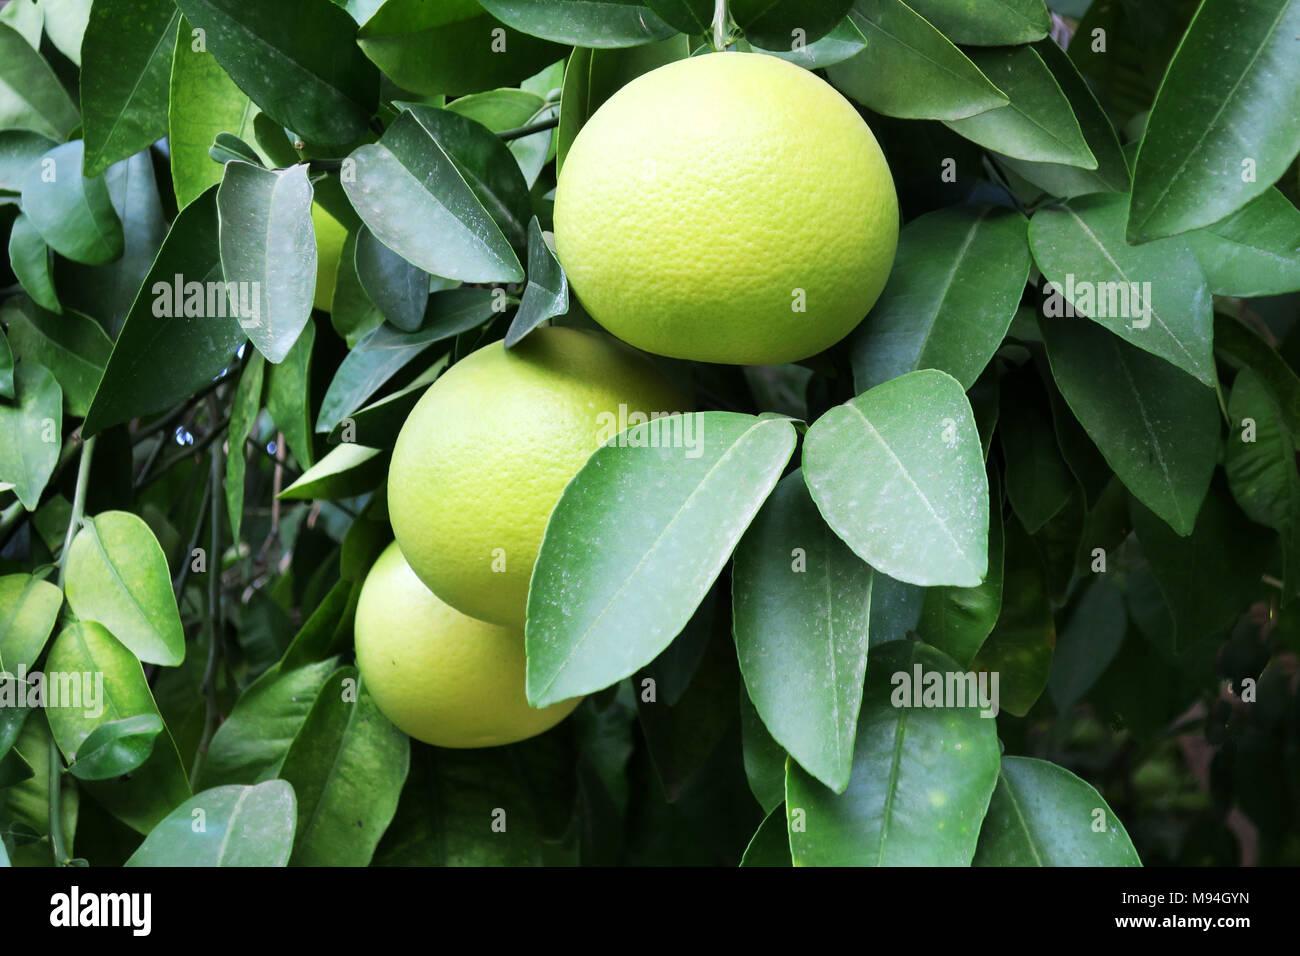 Three almost ripe yellow grapefruits hanging on a tree Stock Photo